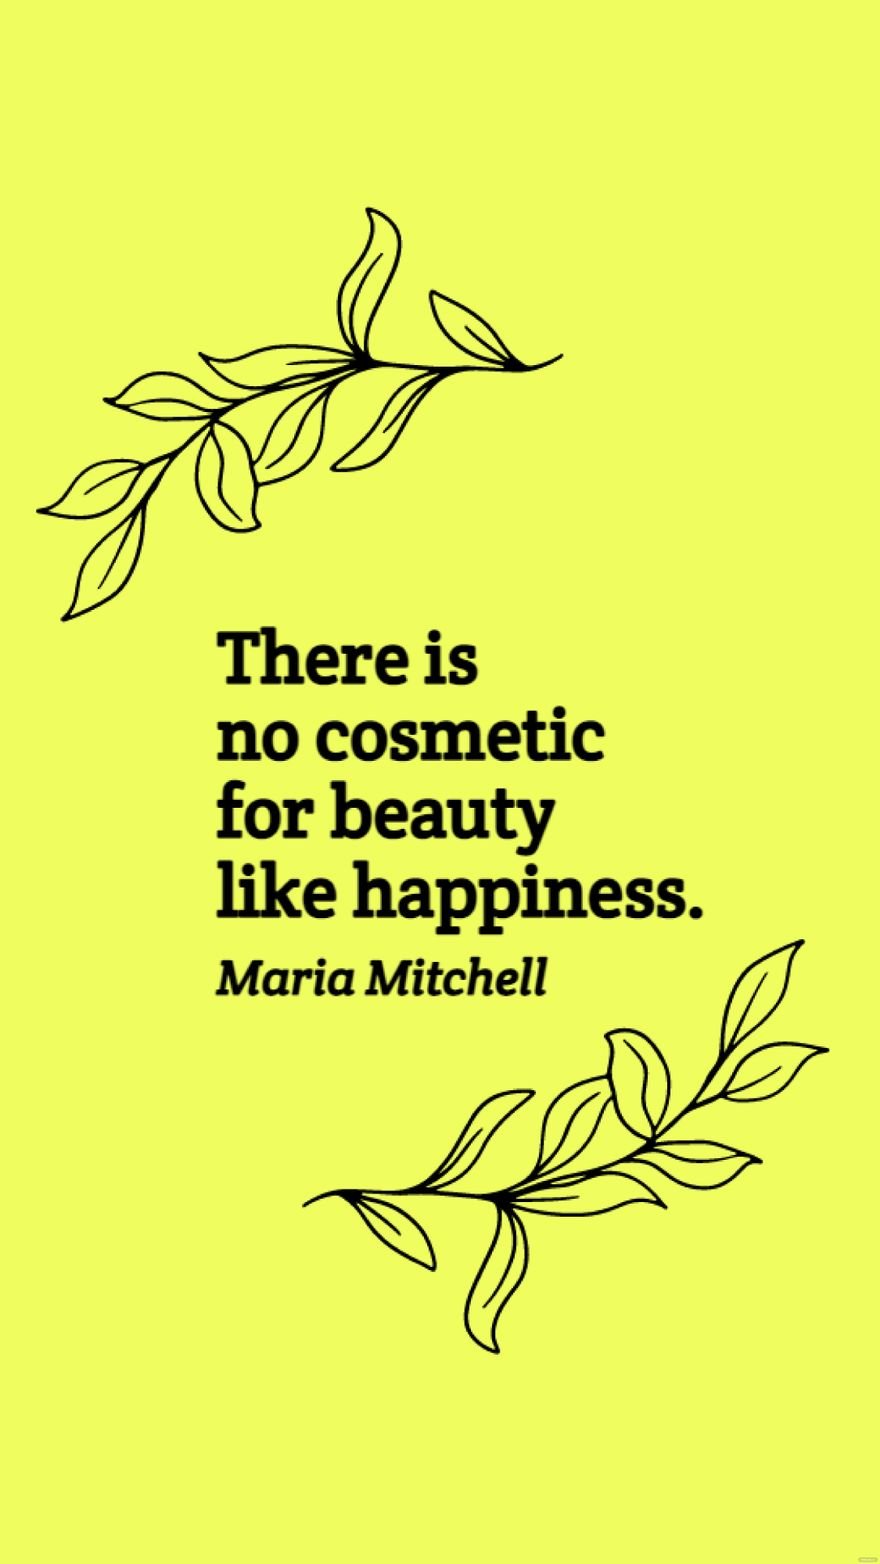 Maria Mitchell - There is no cosmetic for beauty like happiness.